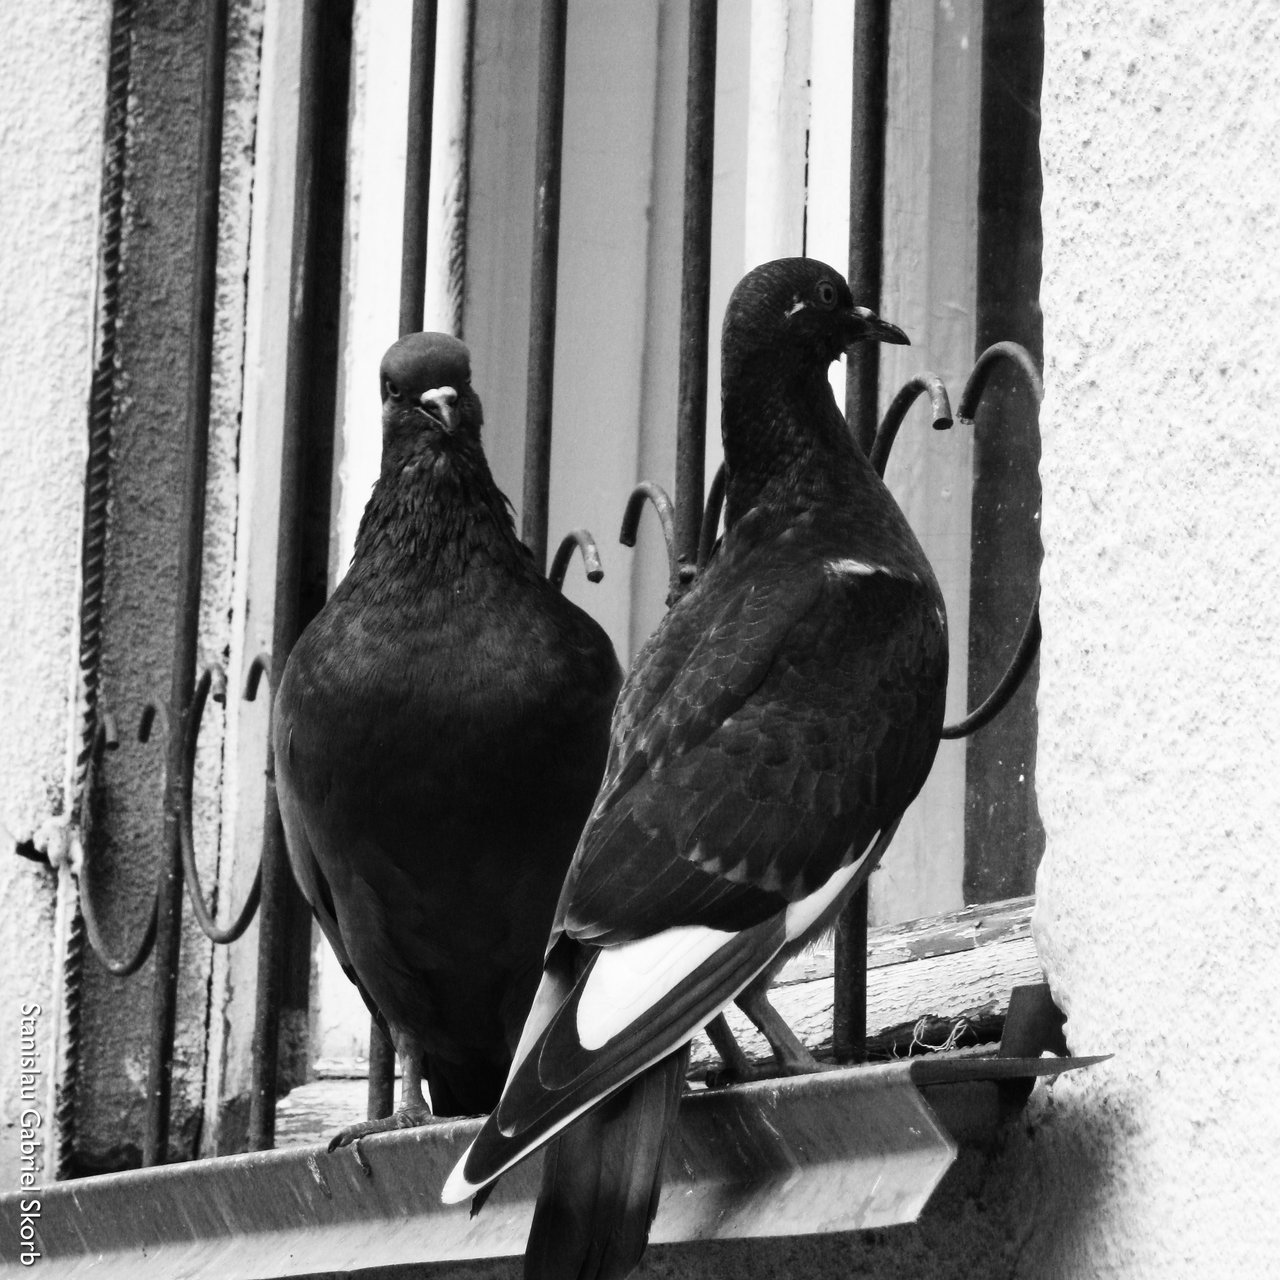 Couple of Pigeons